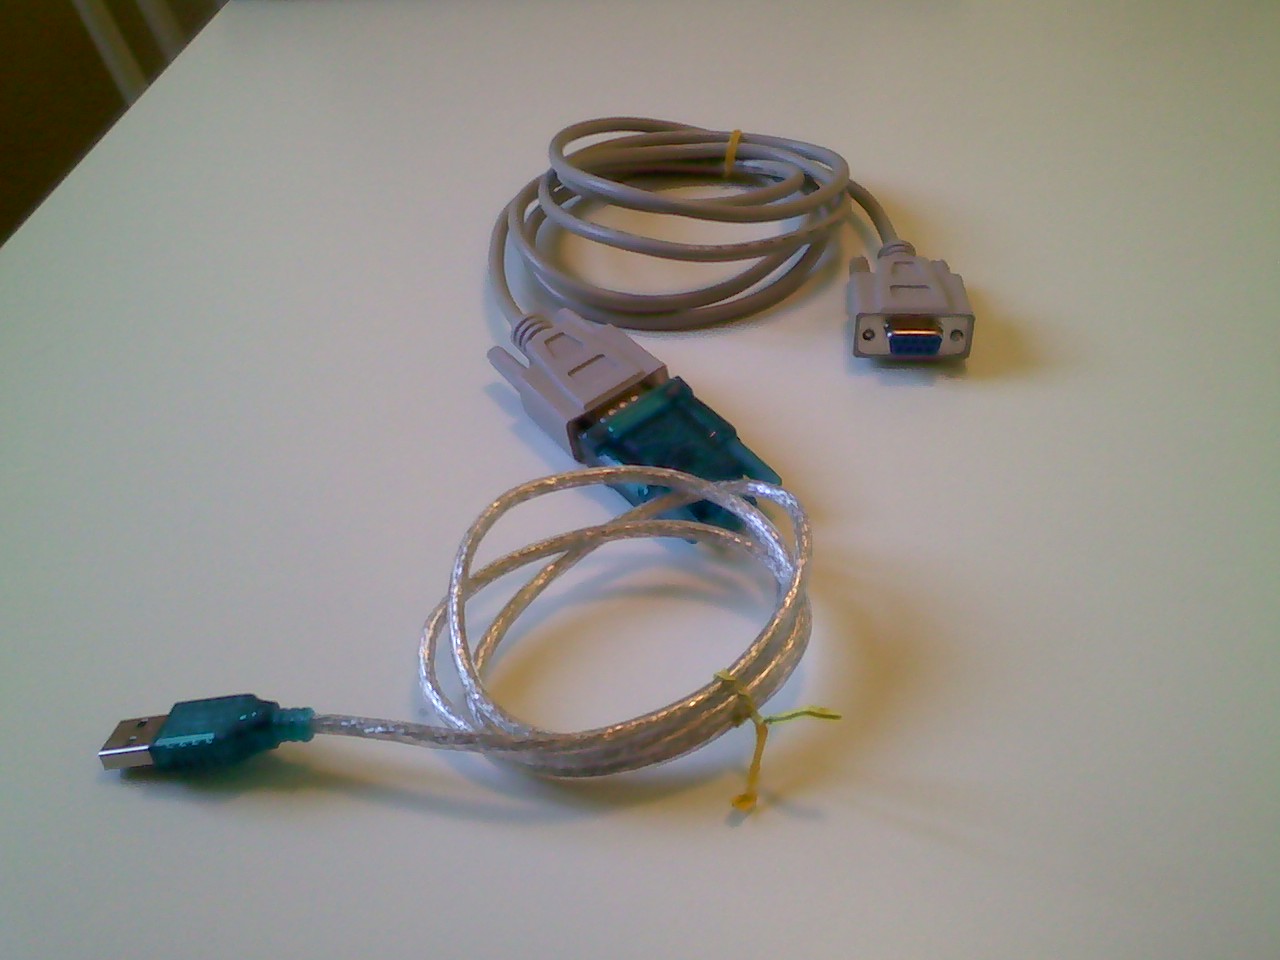 Null Modem Cable Usb To Serial